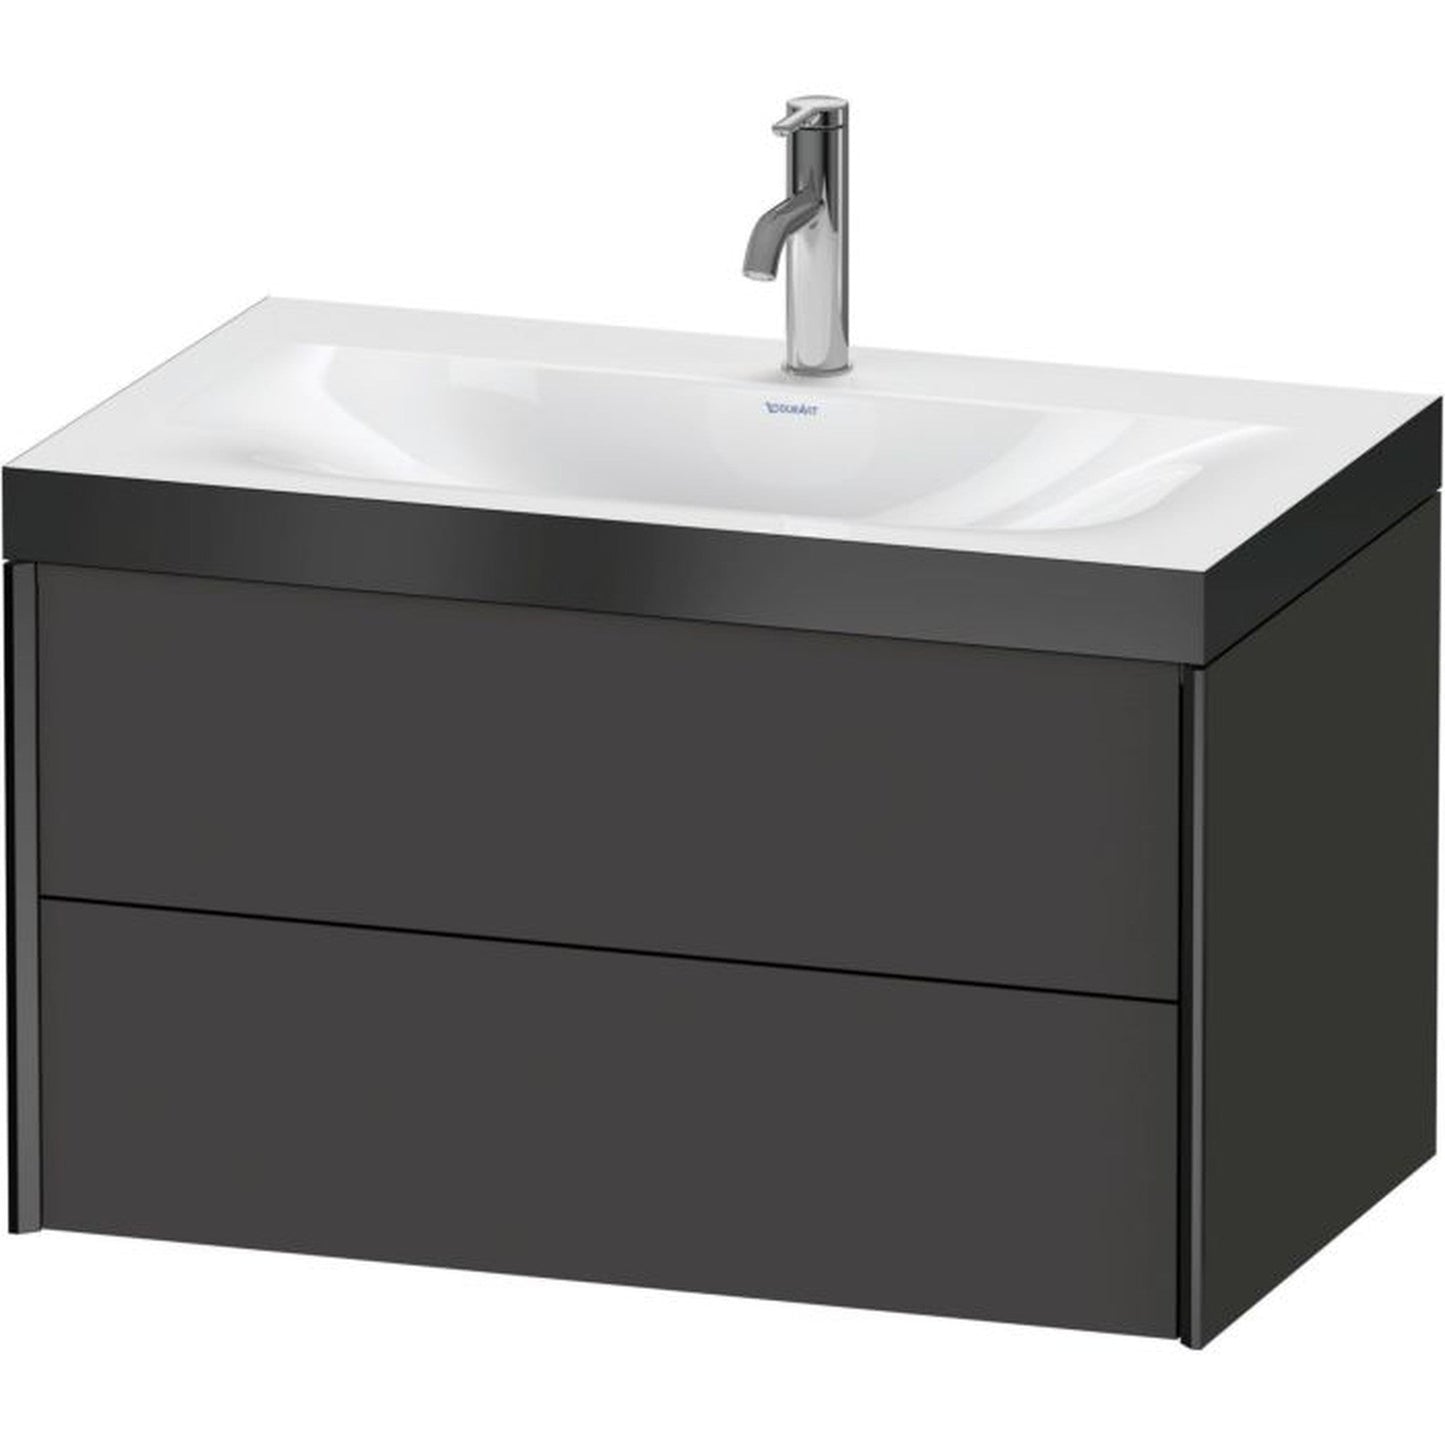 Duravit Xviu 31" x 20" x 19" Two Drawer C-Bonded Wall-Mount Vanity Kit With One Tap Hole, Graphite (XV4615OB280P)